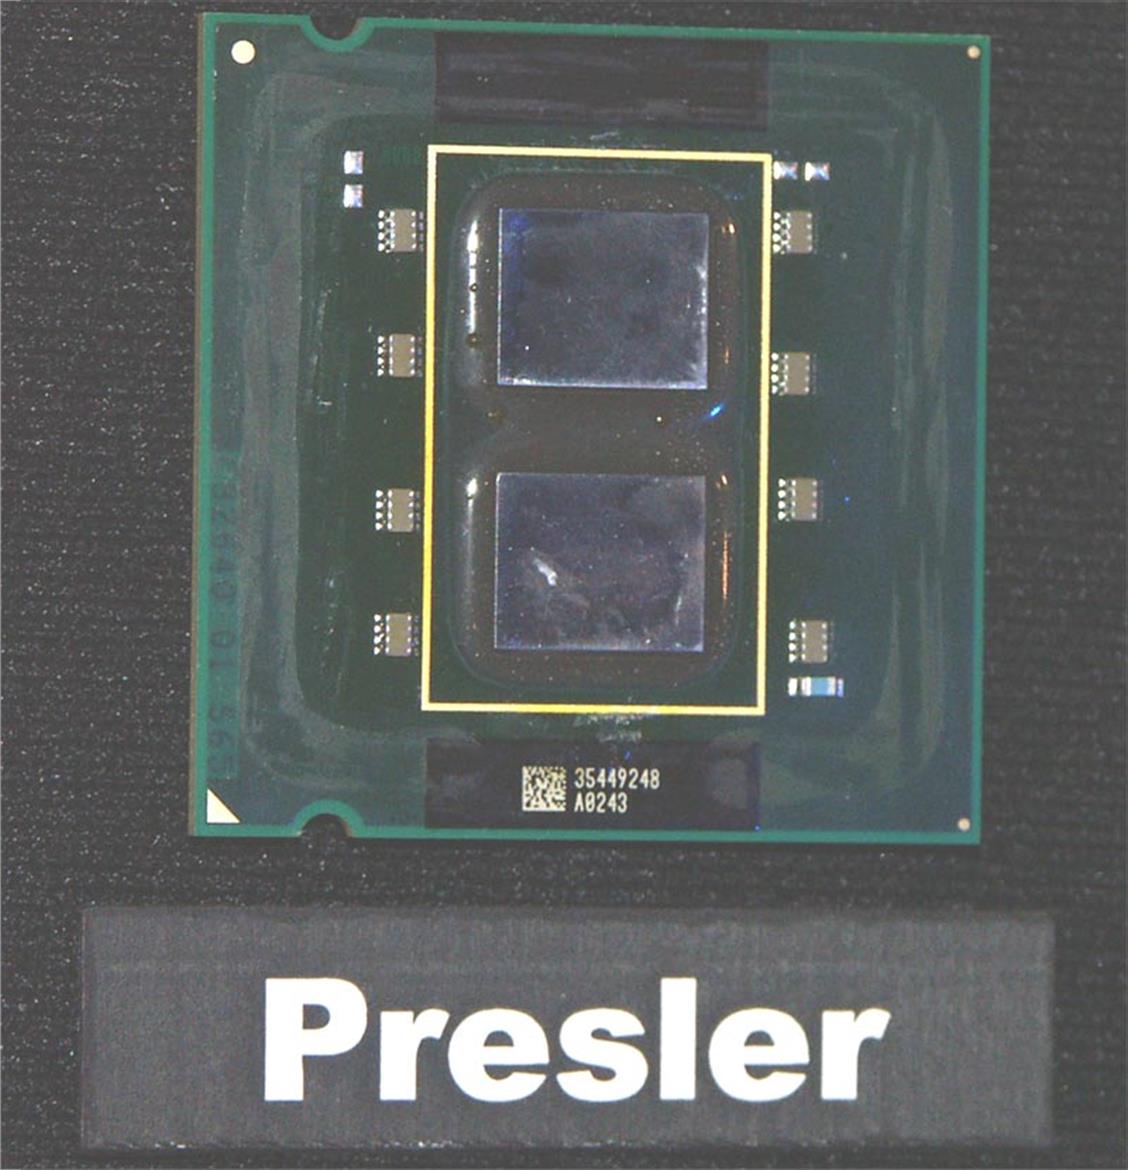 Intel Pentium Extreme Edition 955 & 975X Express Chipset: 65nm is Here